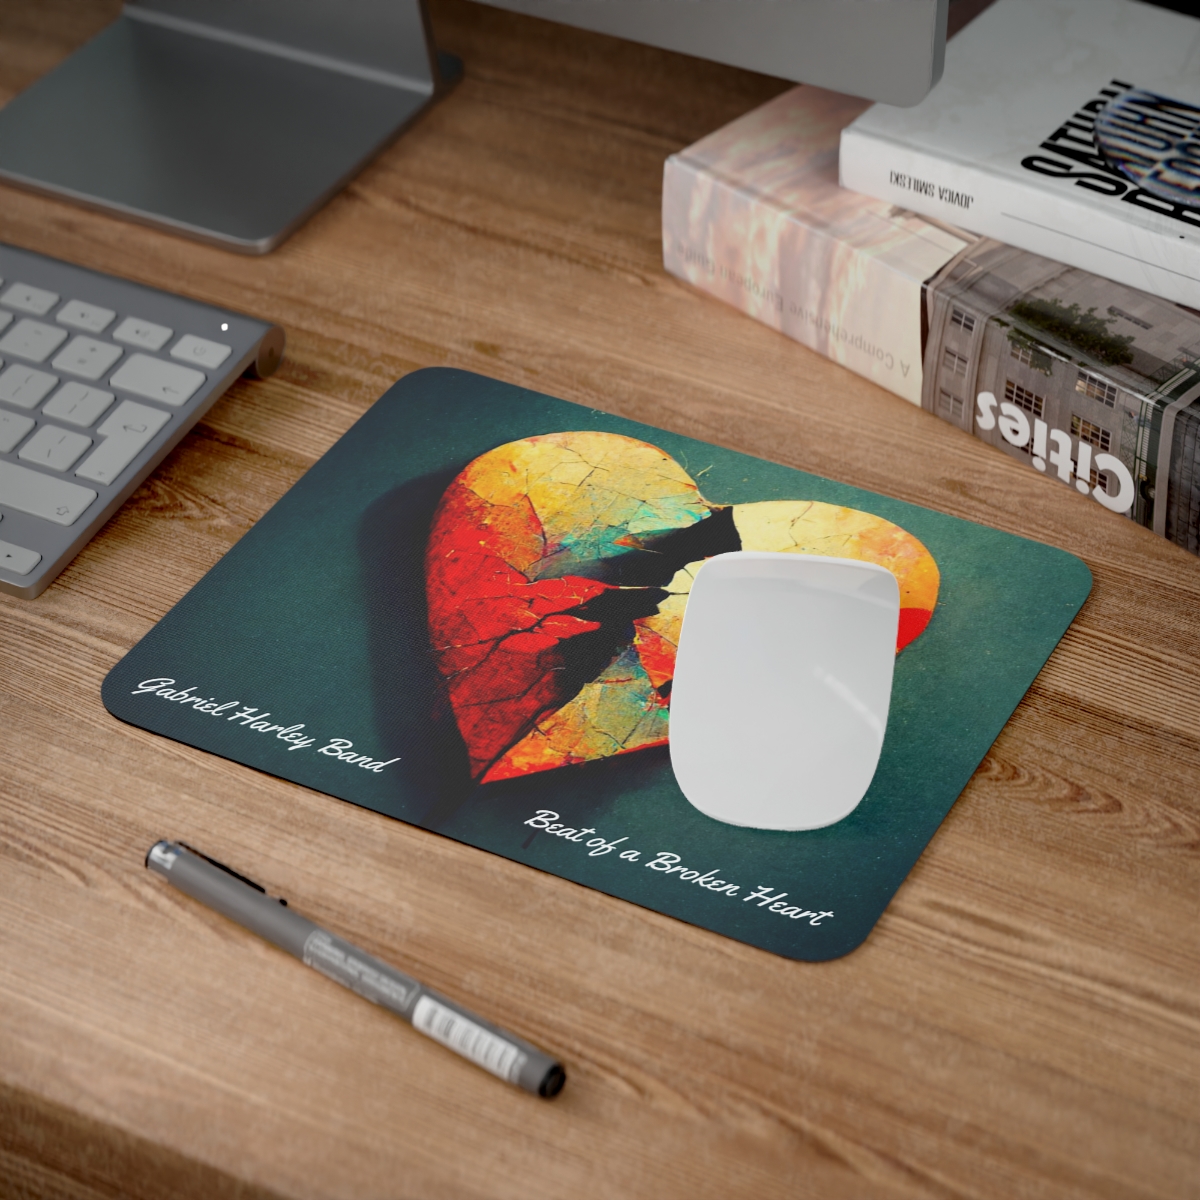 Beat of a Broken Heart Mouse Pad product thumbnail image